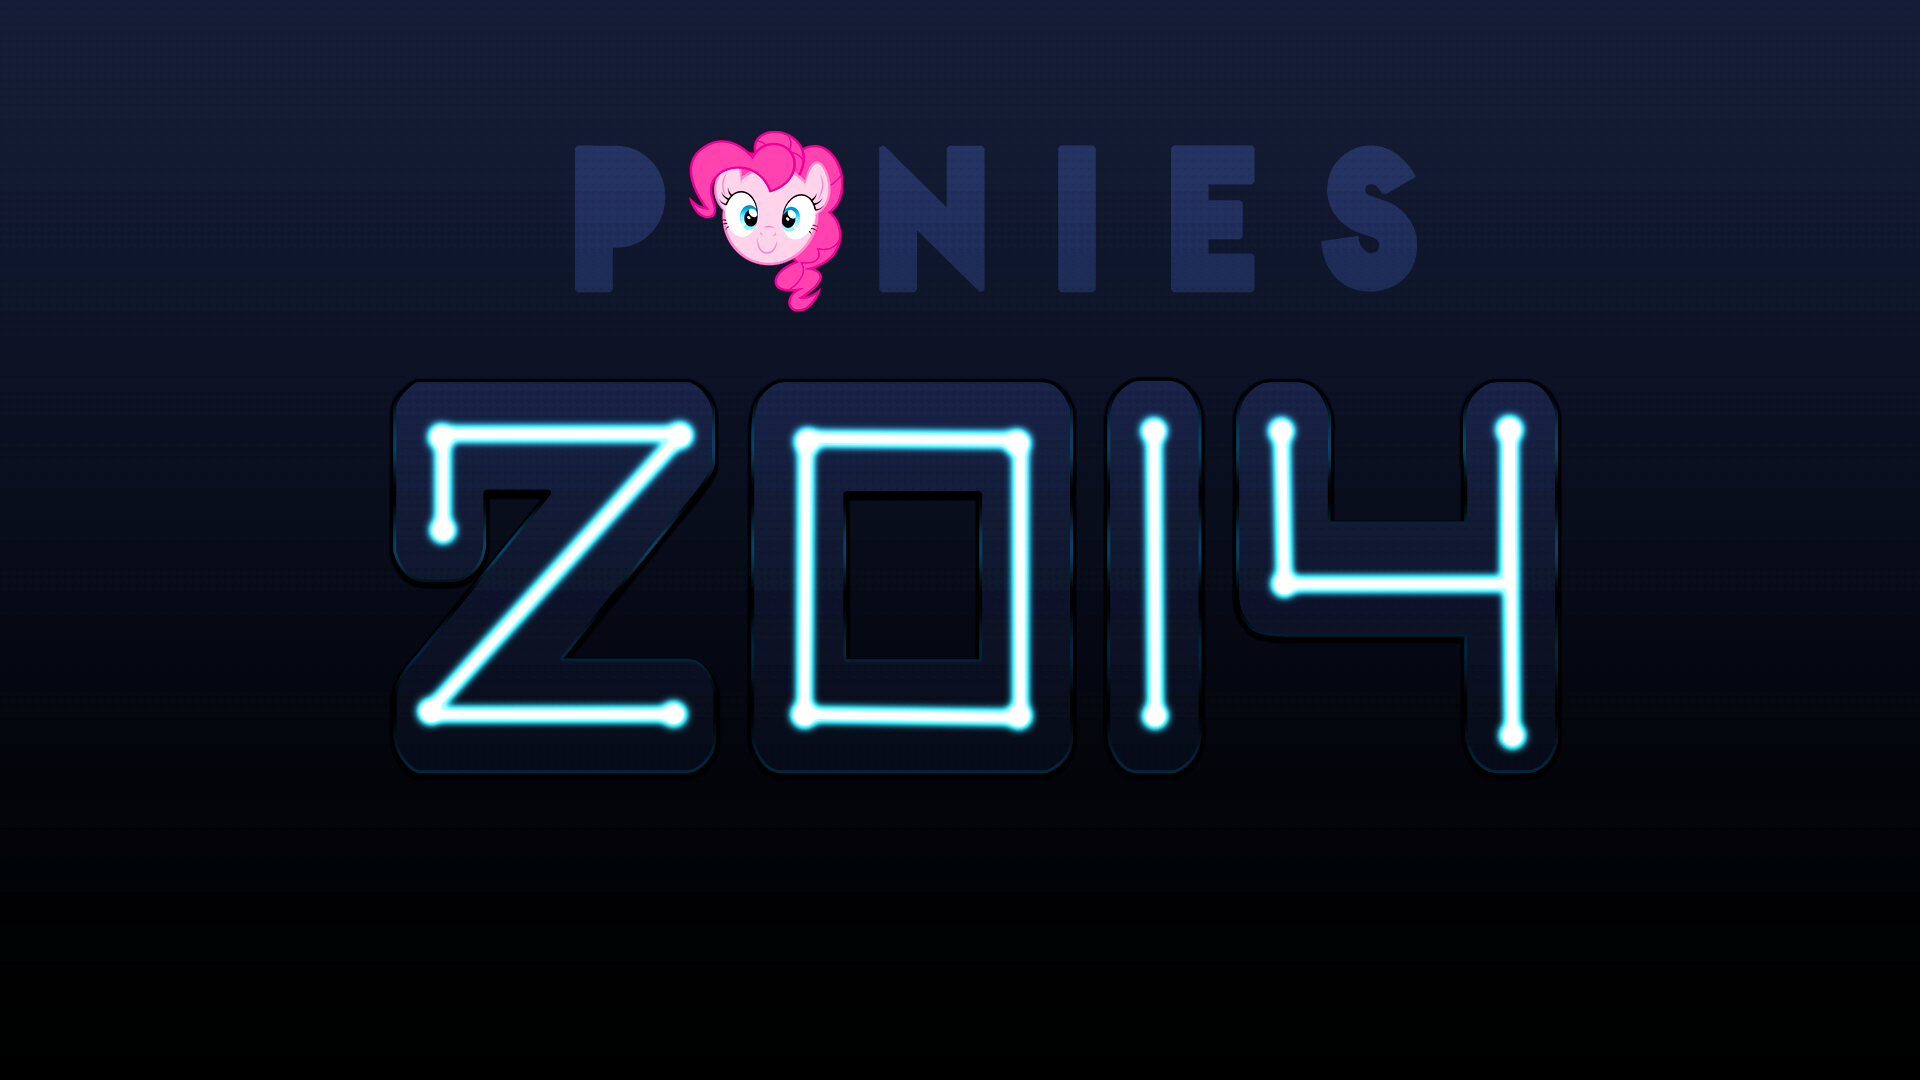 Ponies 2014 by Dipi11 and EquestrianDeviants